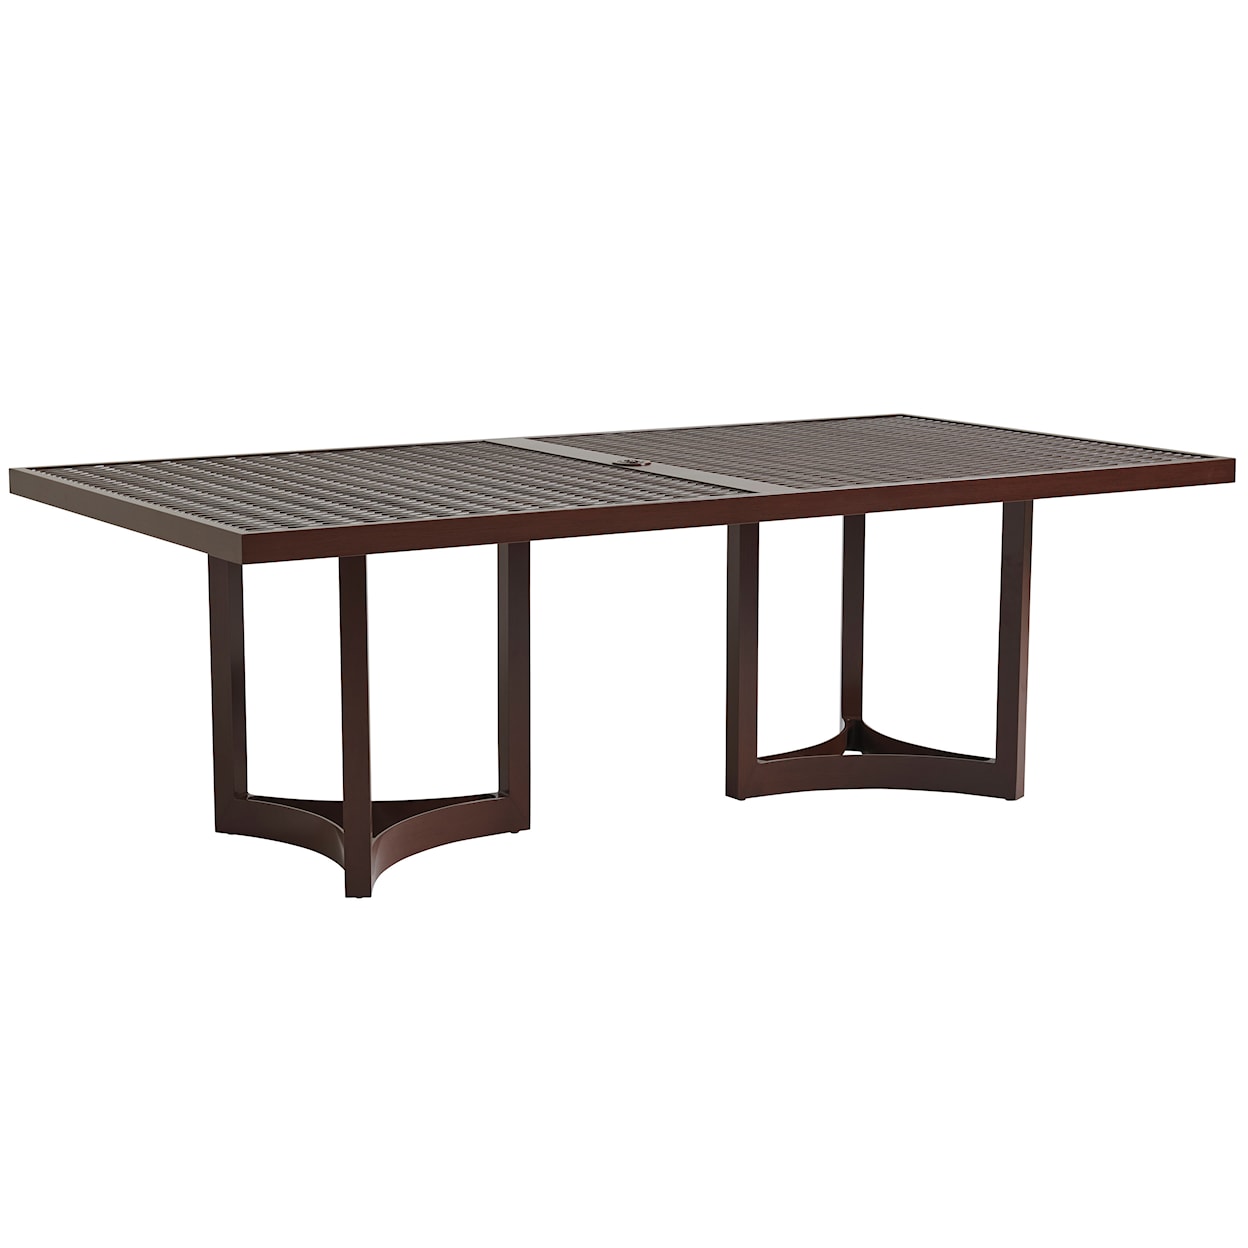 Tommy Bahama Outdoor Living Abaco Rectangular Dining Table